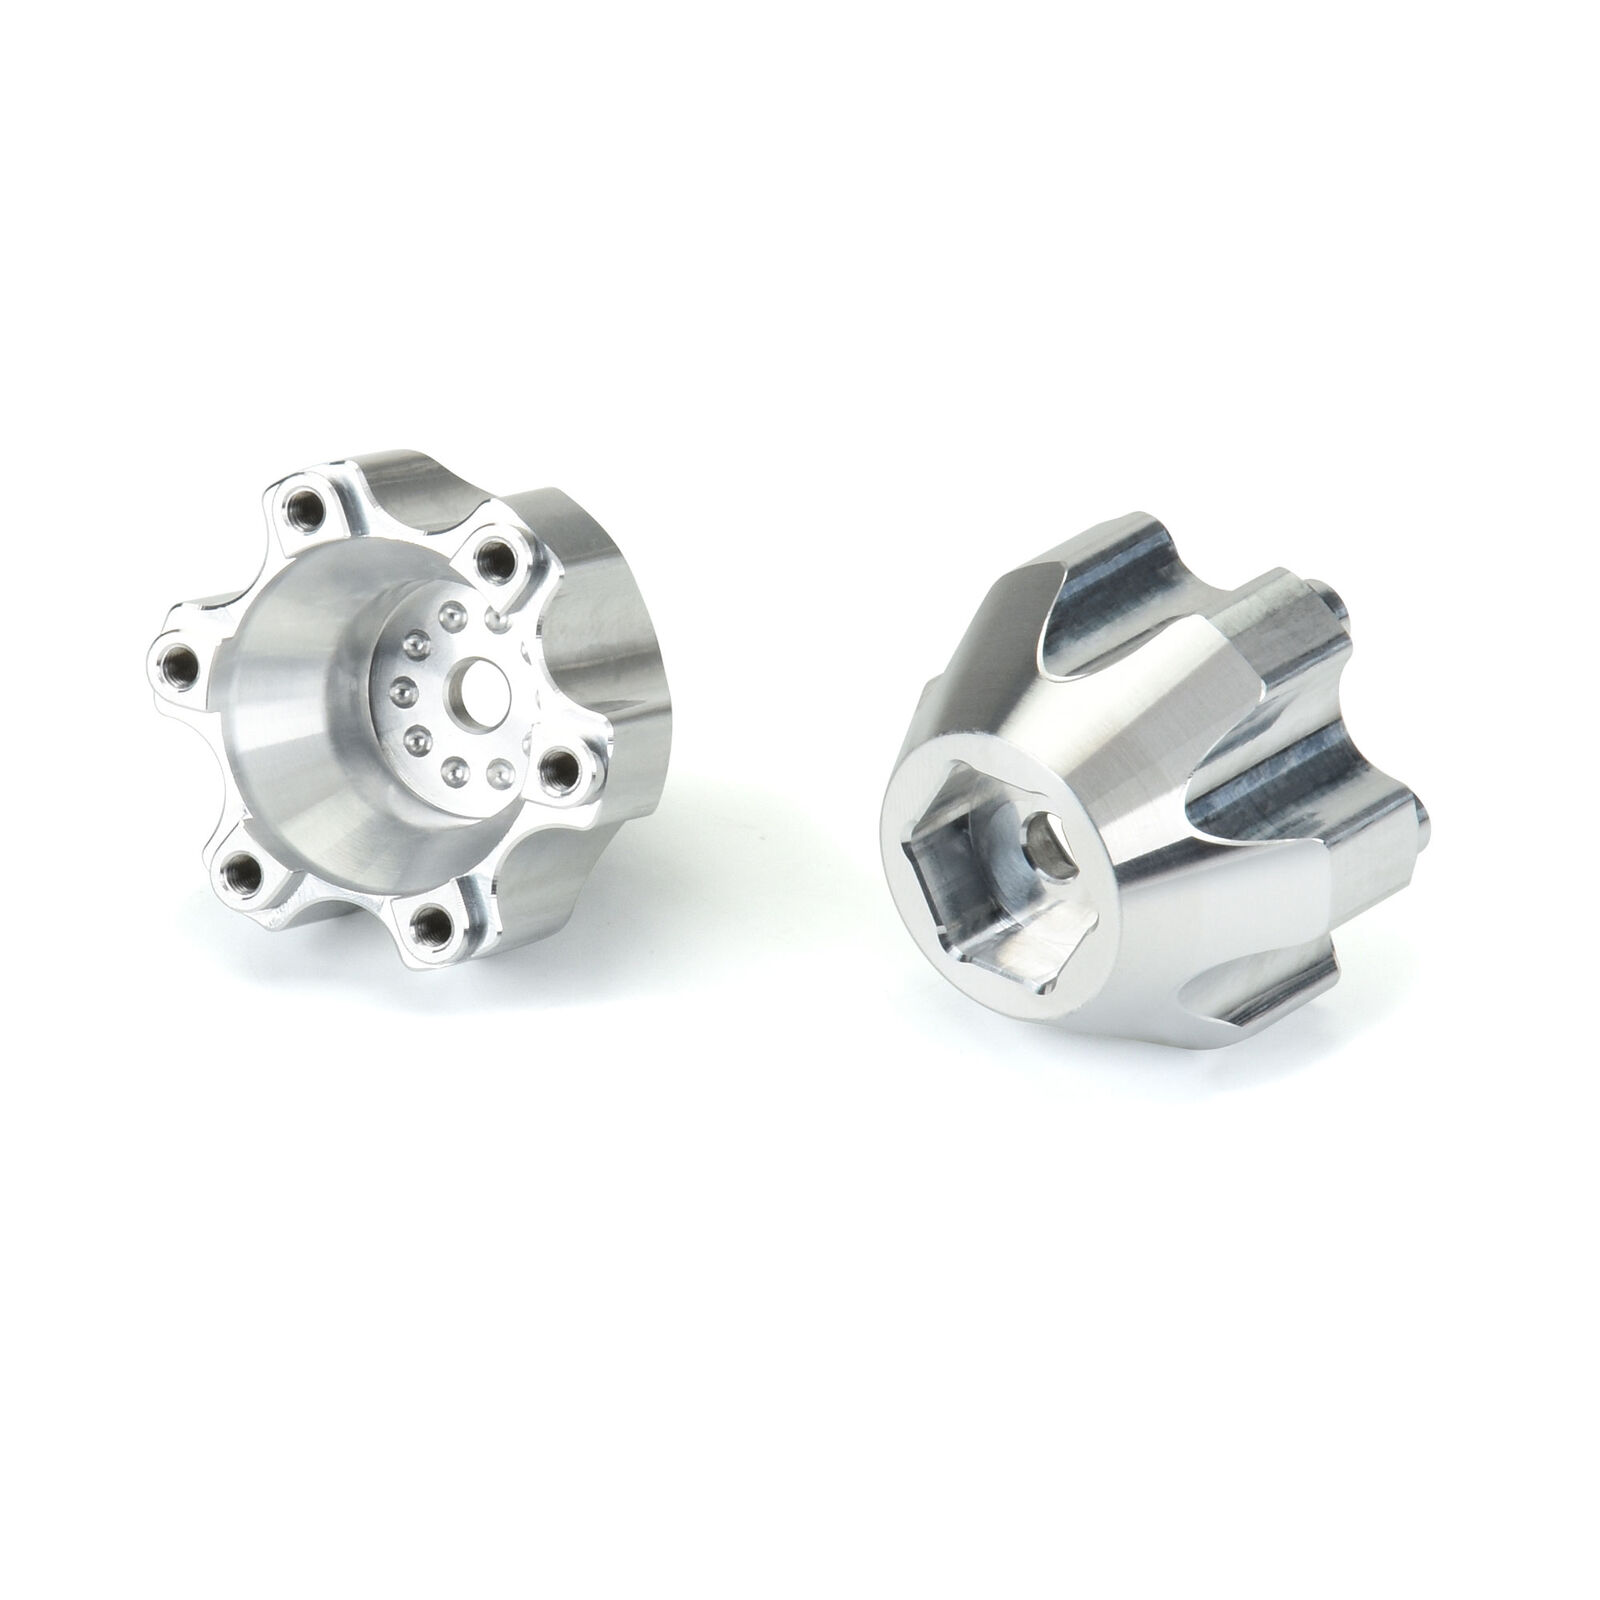 1/10 6x30 to 14mm Aluminum Hex Adapters